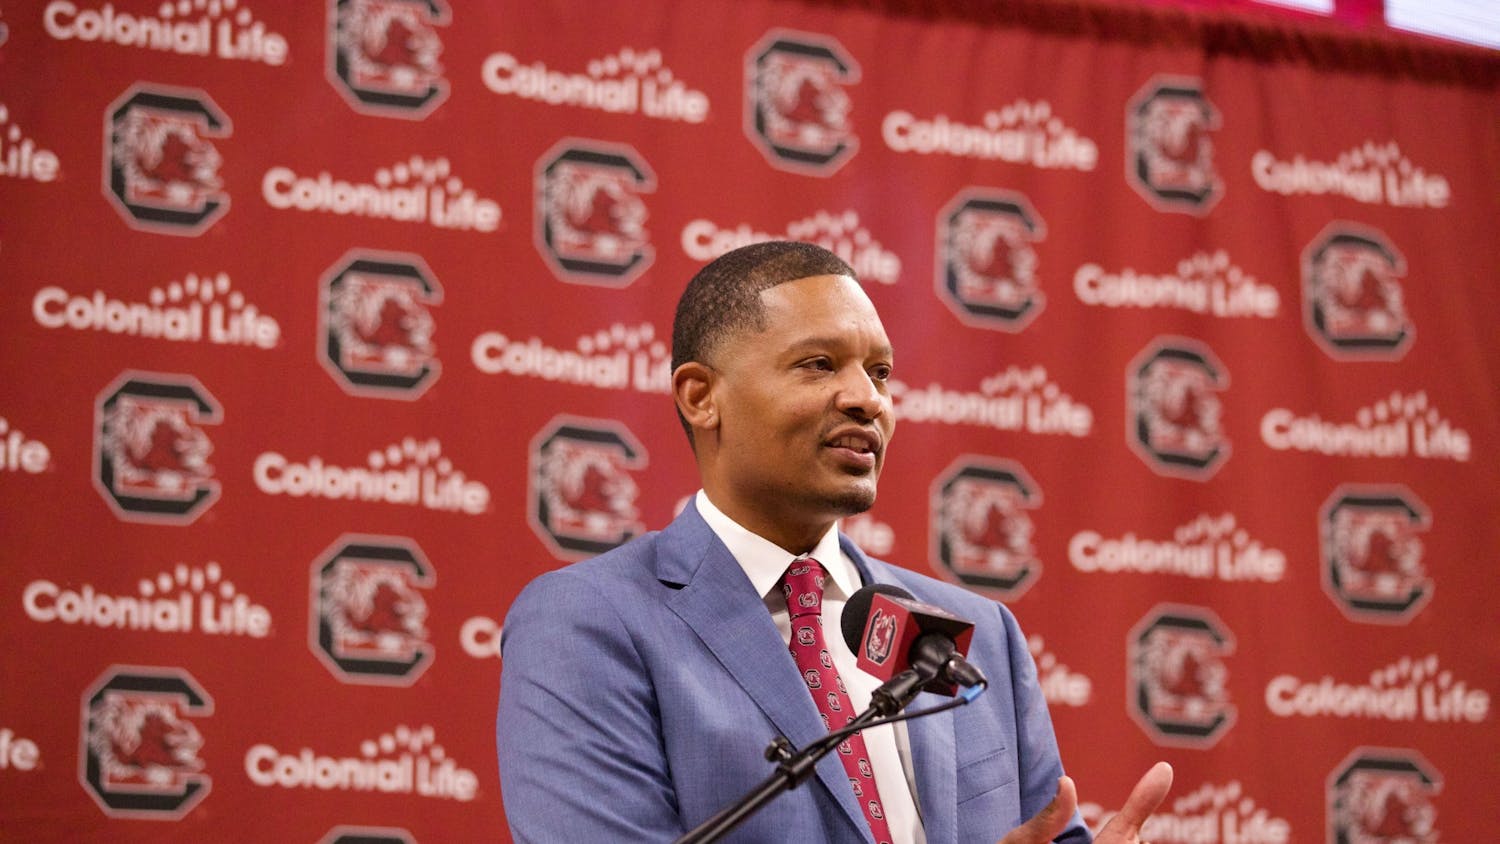 New men’s basketball coach Lamont Paris during his introductory press conference on March 24, 2022. The press conference was held on the floor of Colonial Life Arena.